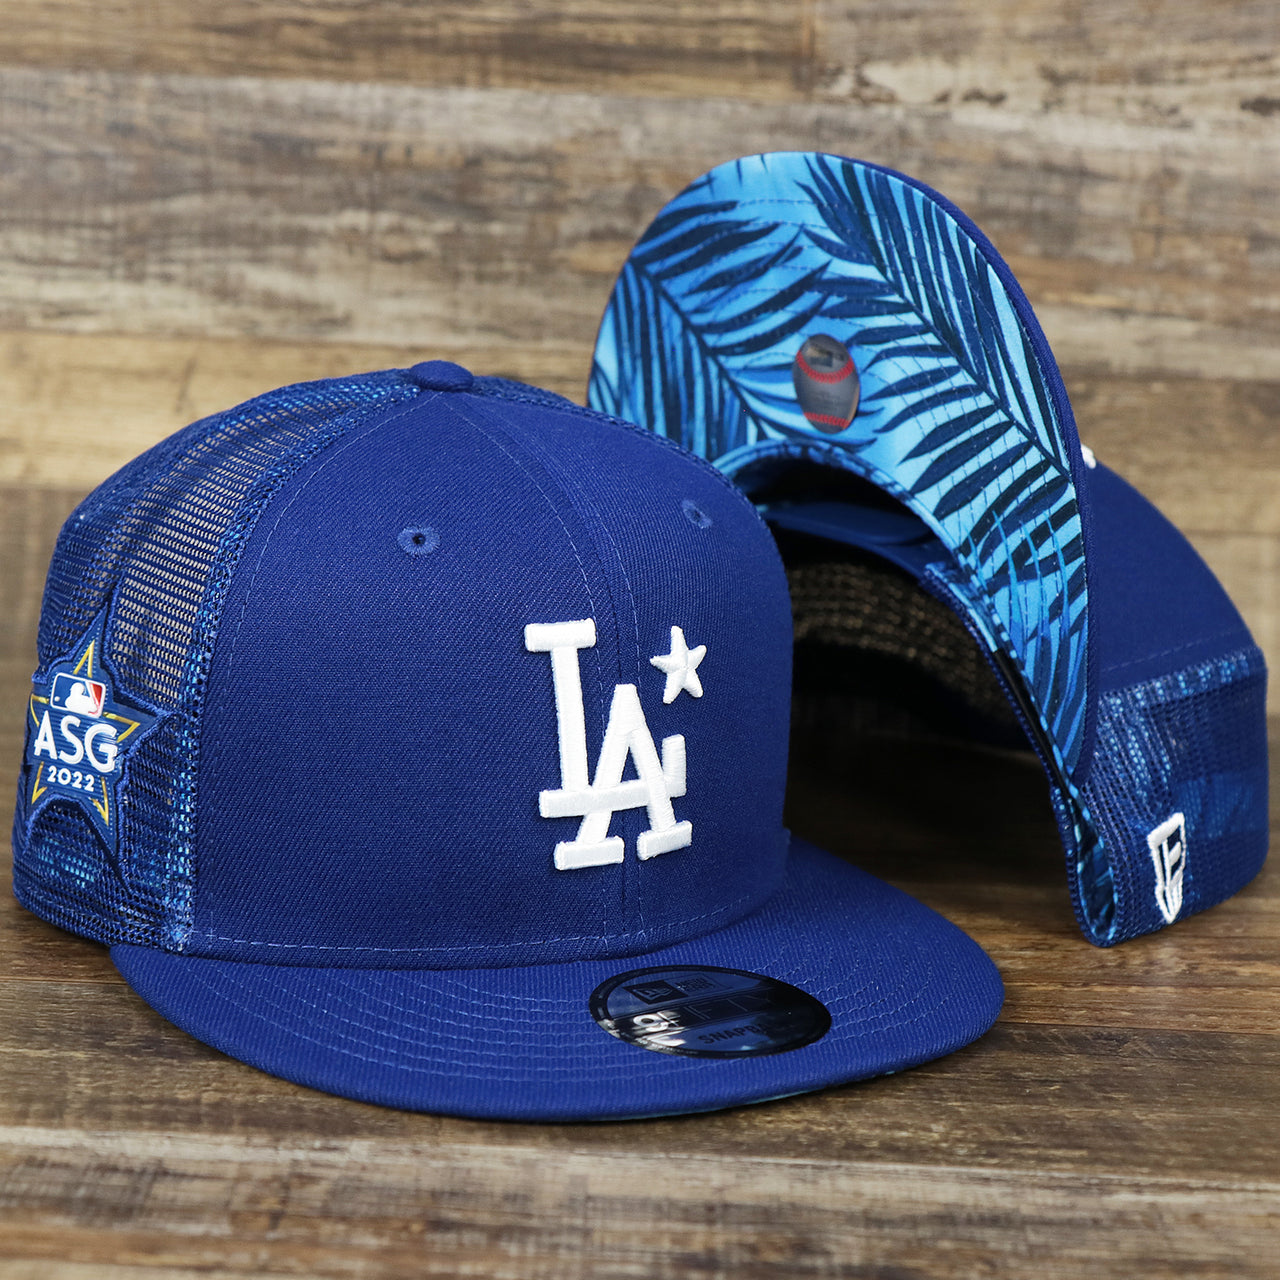 The Youth Los Angeles Dodgers MLB 2022 All Star Game Mesh Back 9Fifty Snapback Cap | ASG 2022 Royal Blue Trucker Hat